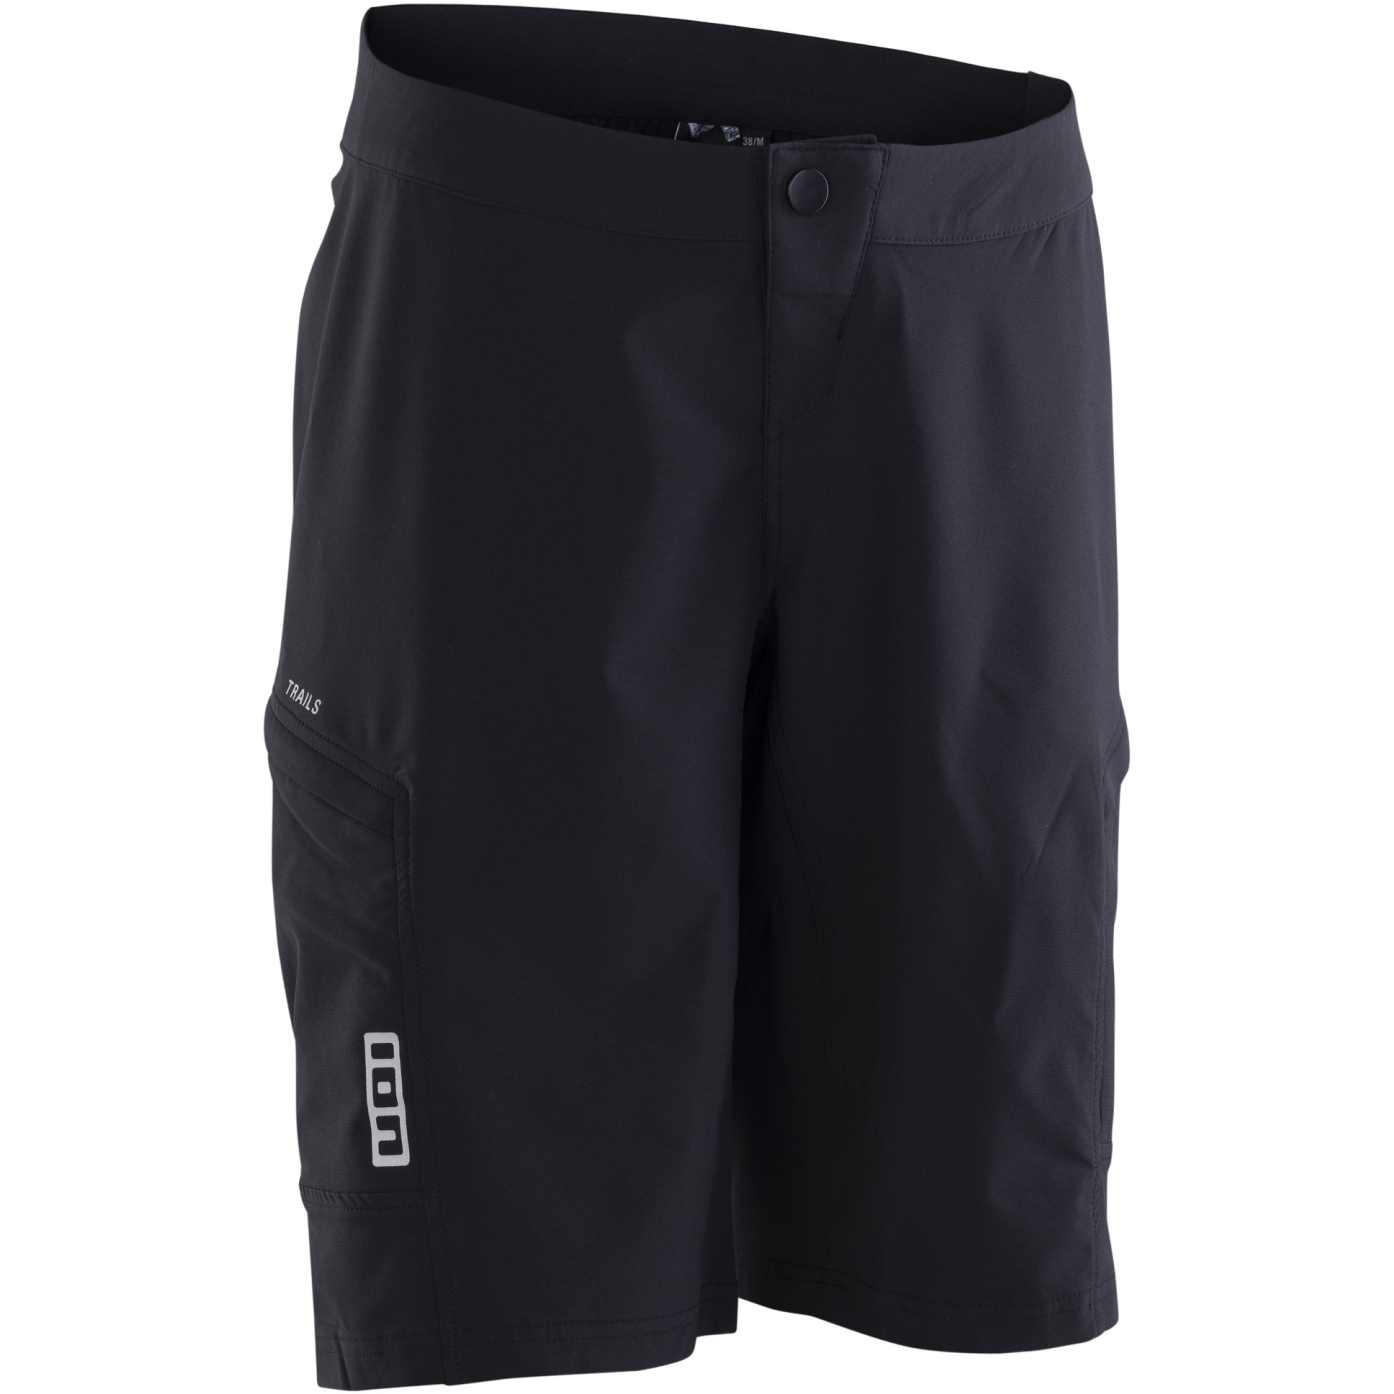 Picture of ION Bike Shorts VNTR AMP Women - Black